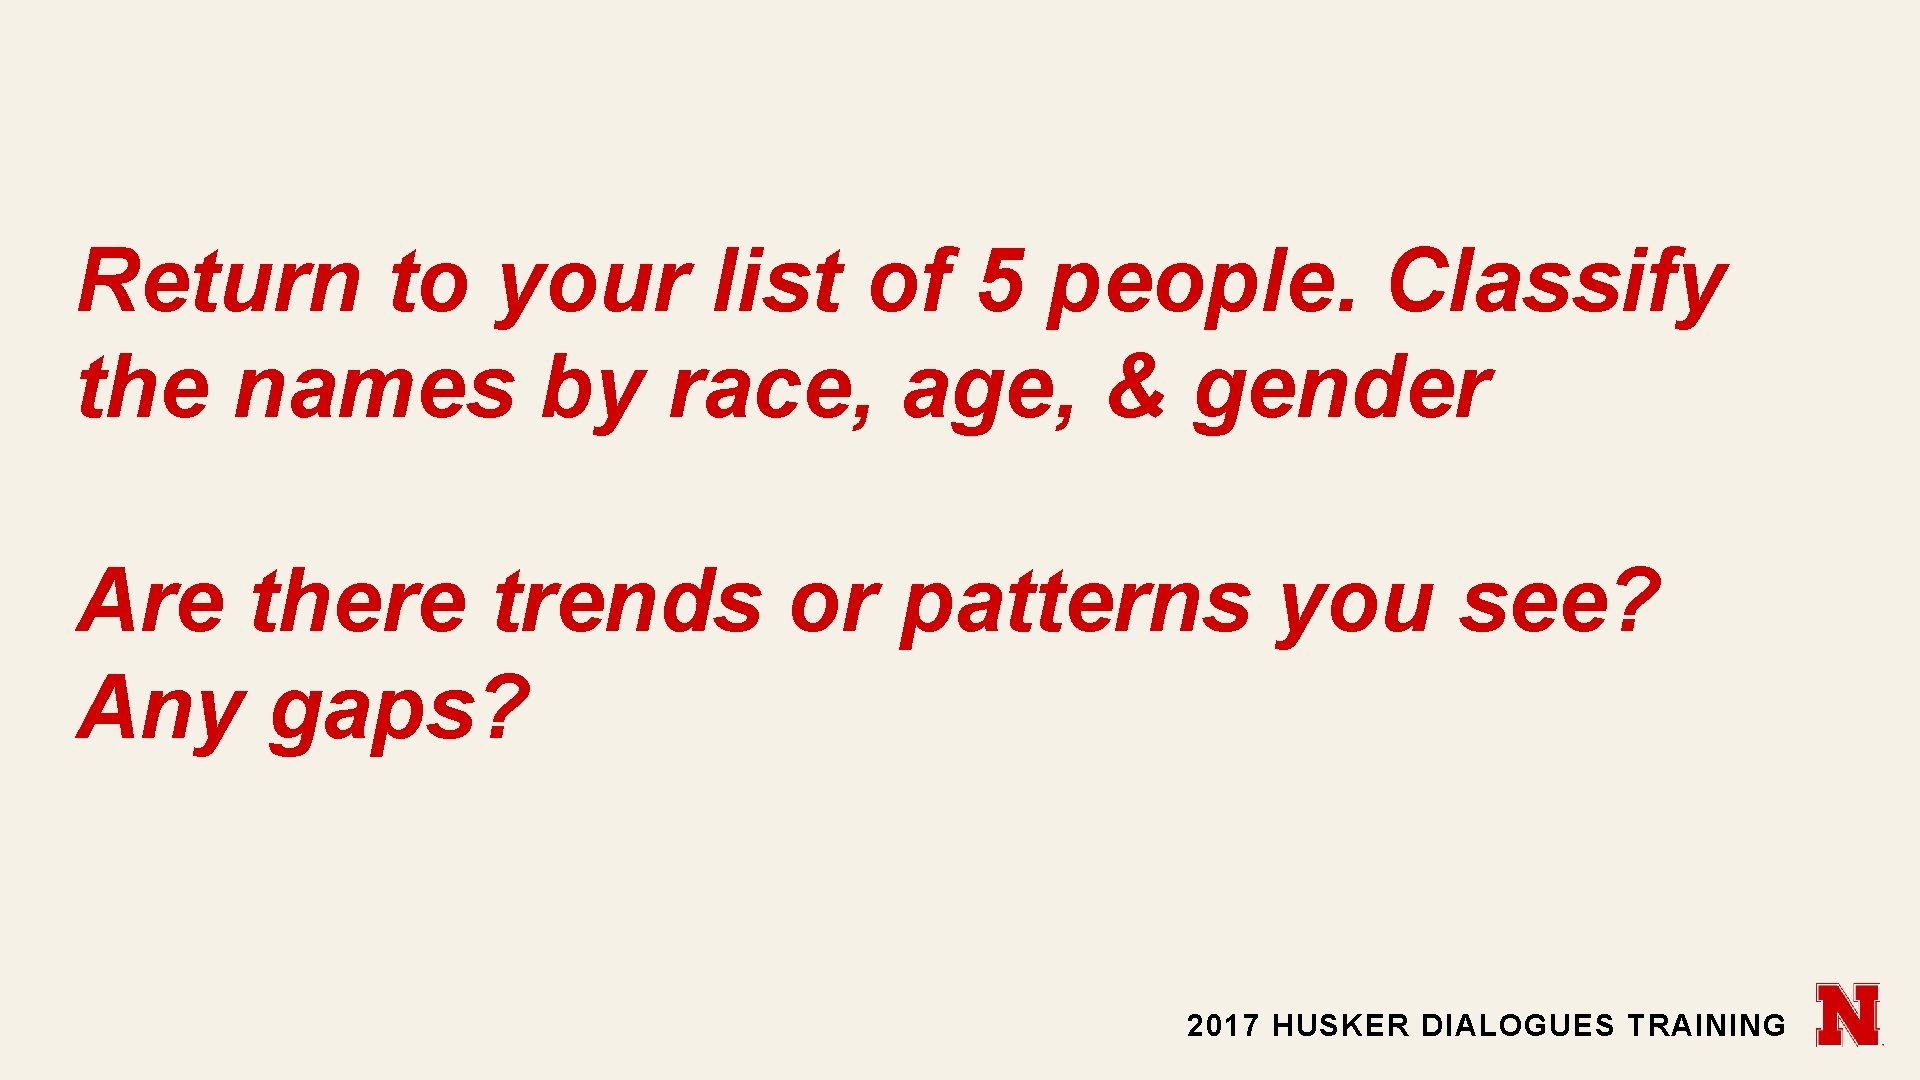 Return to your list of 5 people. Classify the names by race, age, &